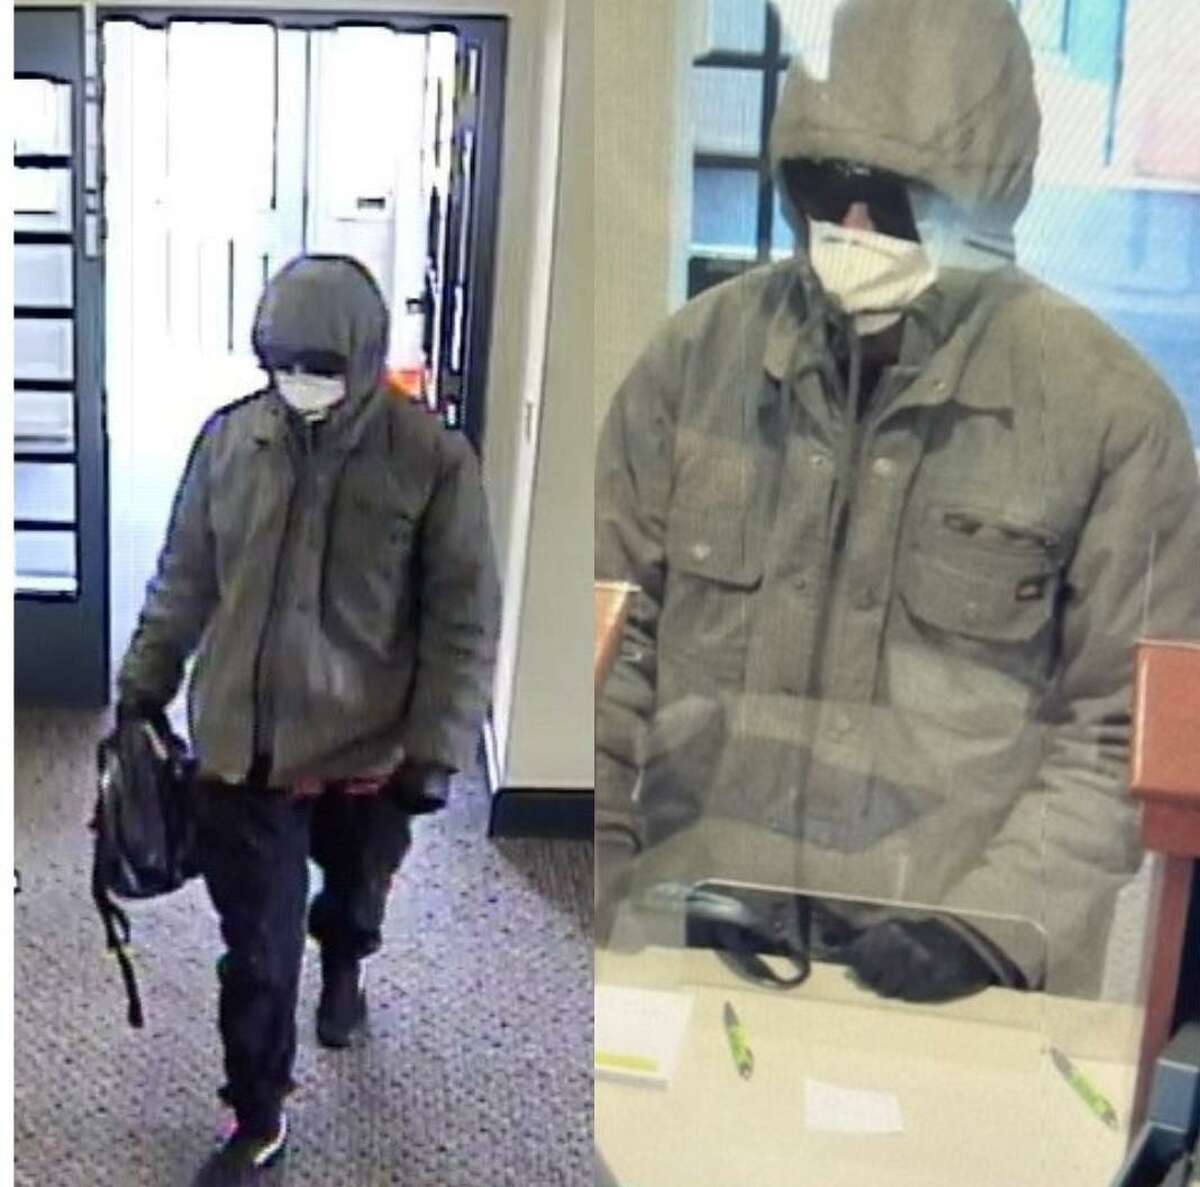 Torrington police are trying to identify this man suspected of carrying out a bank robbery Tuesday, March 15, 2022.